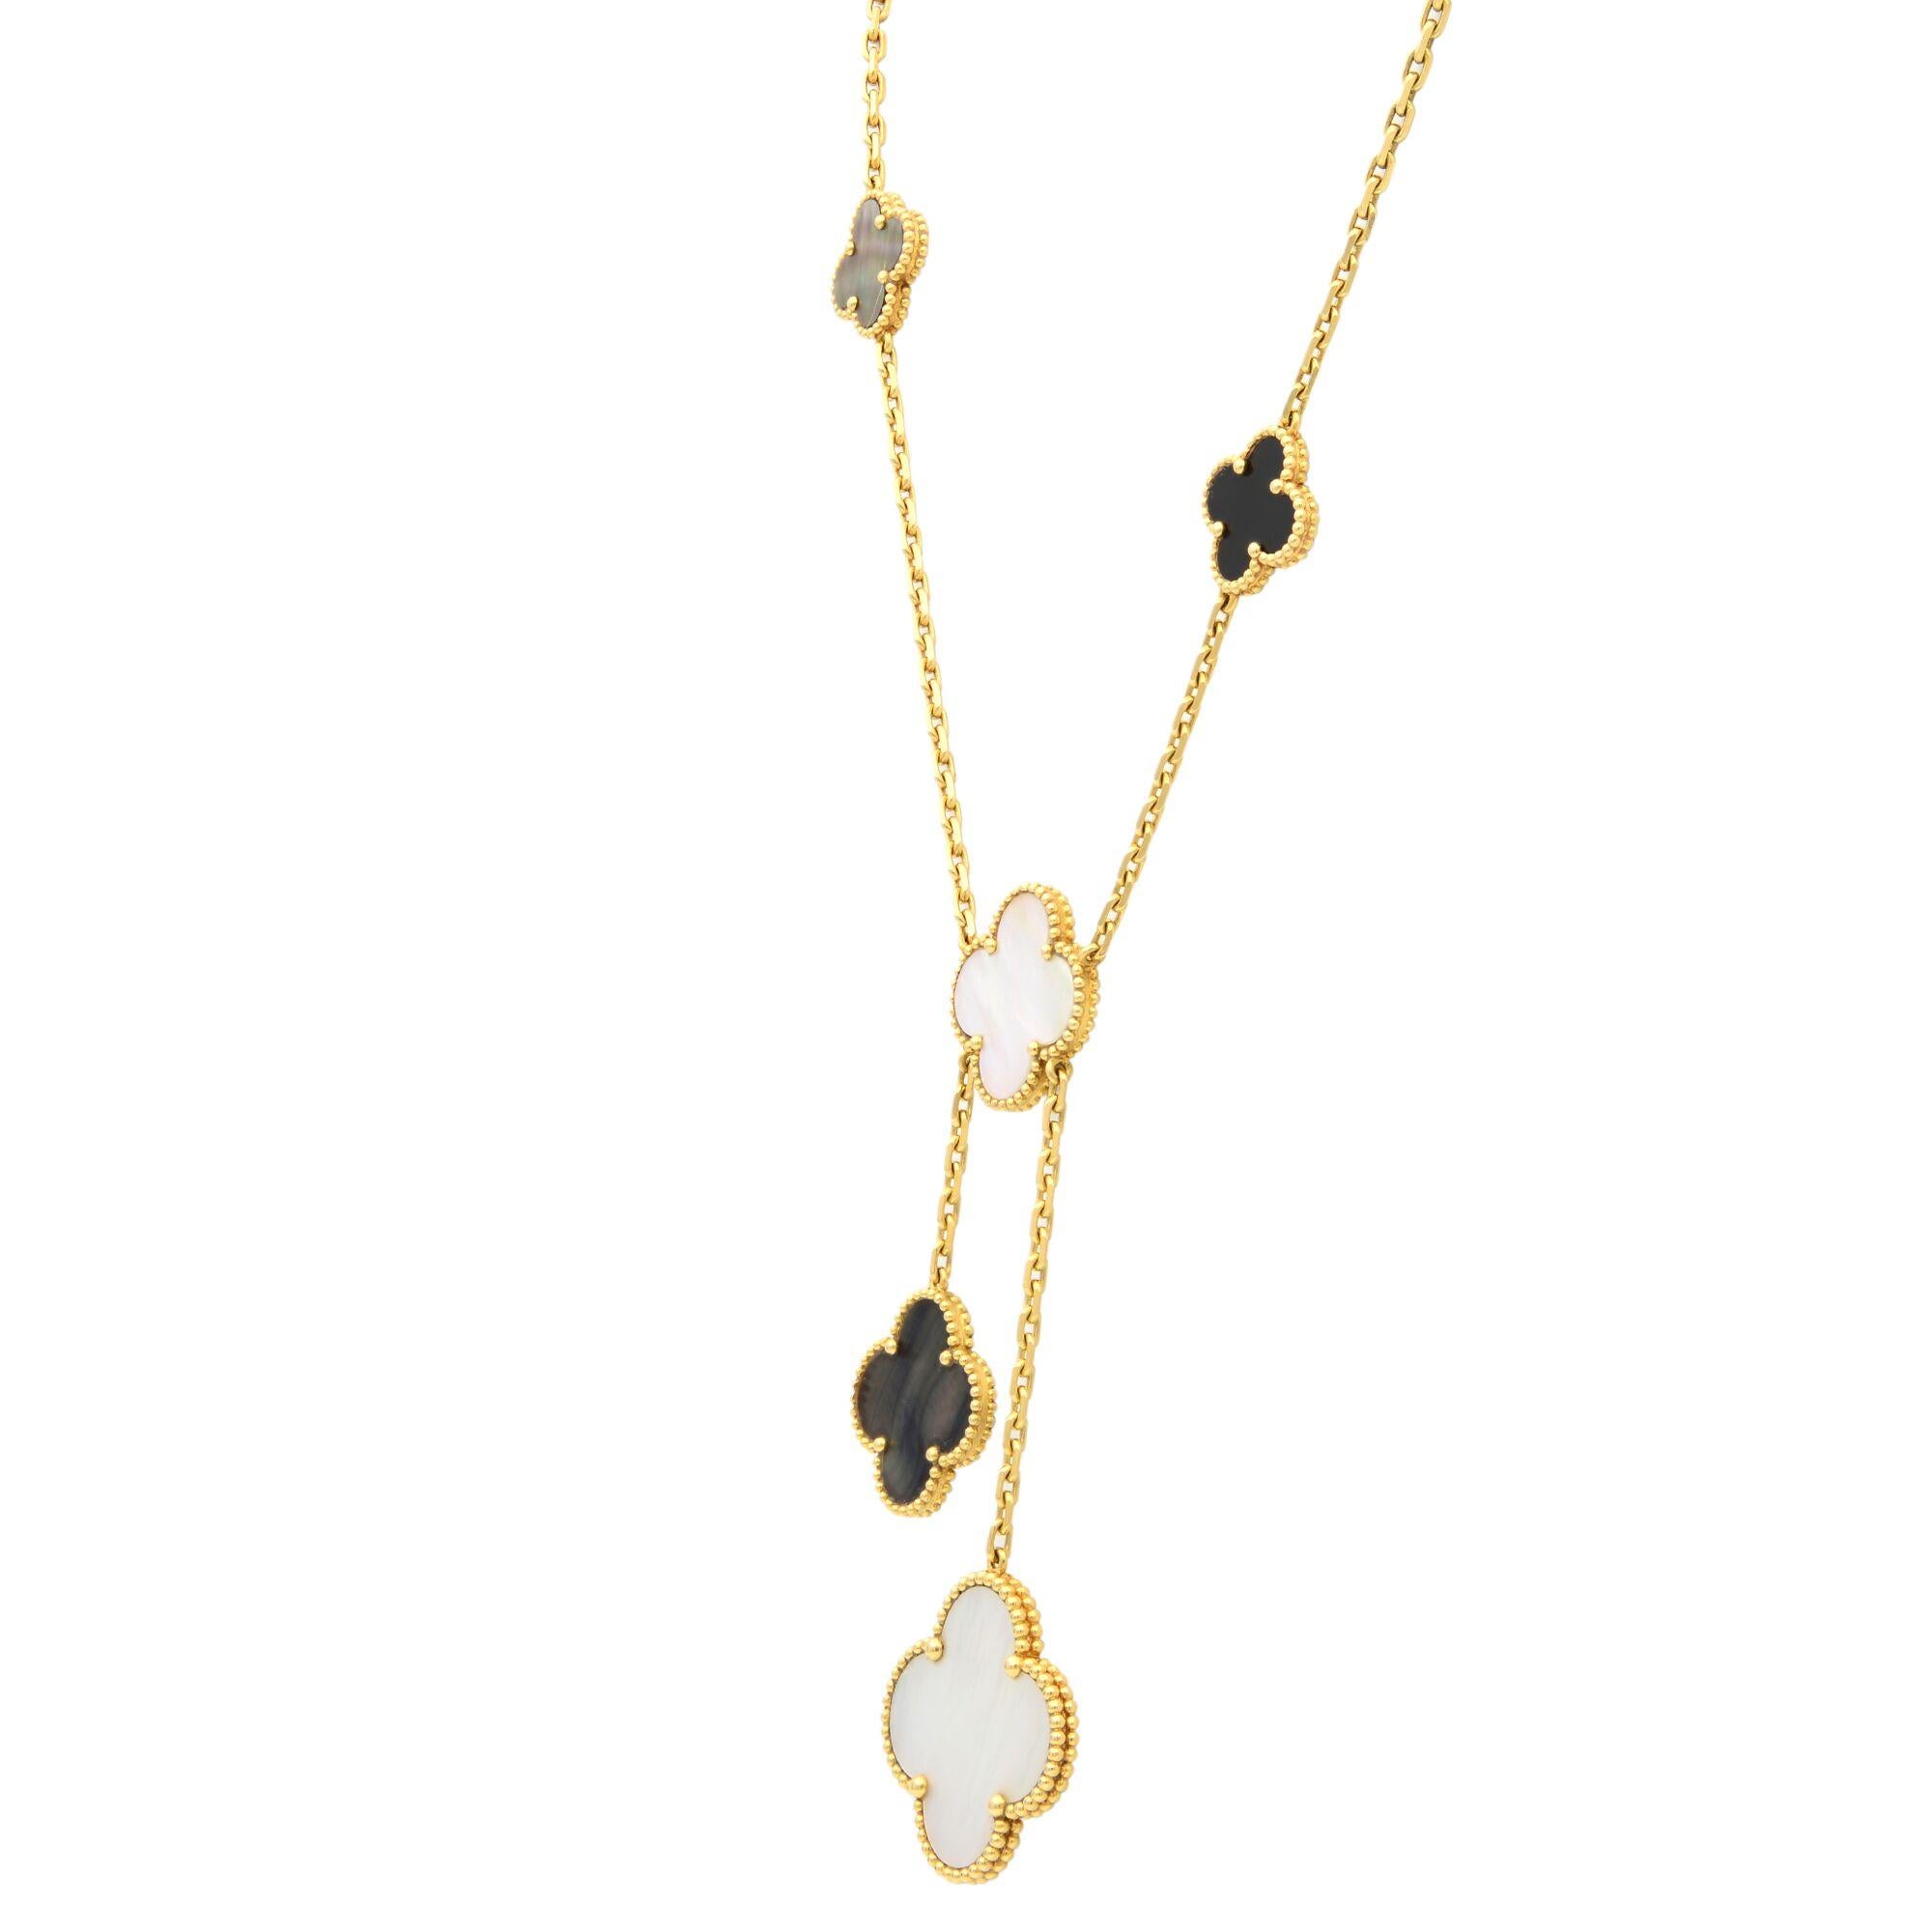 Magic Alhambra necklace by Van Cleef & Arpels. Multi-size mixed drops. Black onyx with white and gray mother-of-pearl.
Created in 2006 by Van Cleef & Arpels, the Magic Alhambra jewelry creations gather different-sized Alhambra motifs, coming